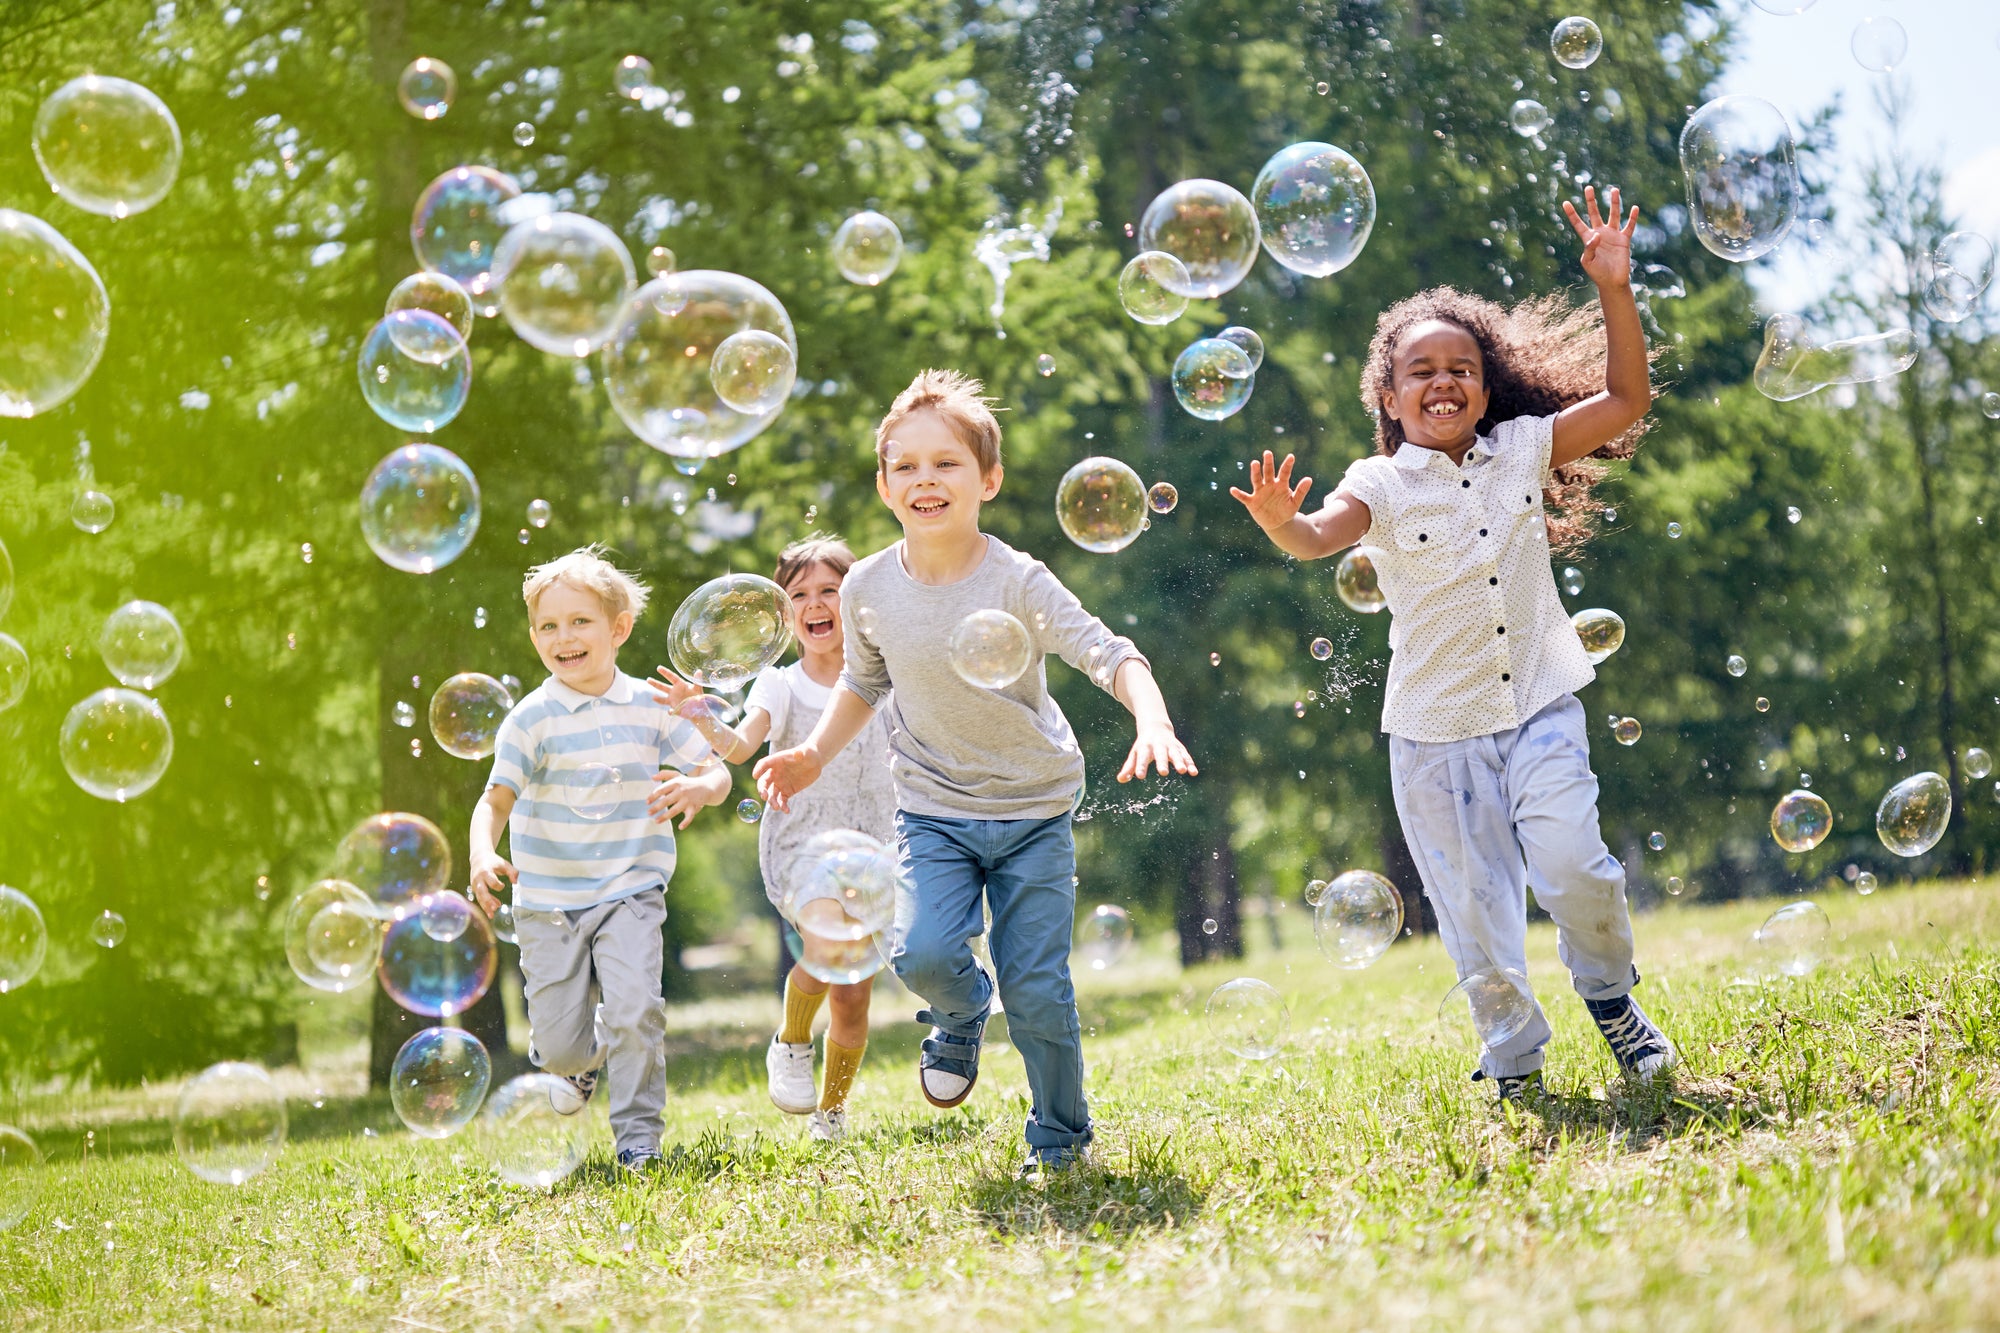 Kids playing outdoors with bubbles